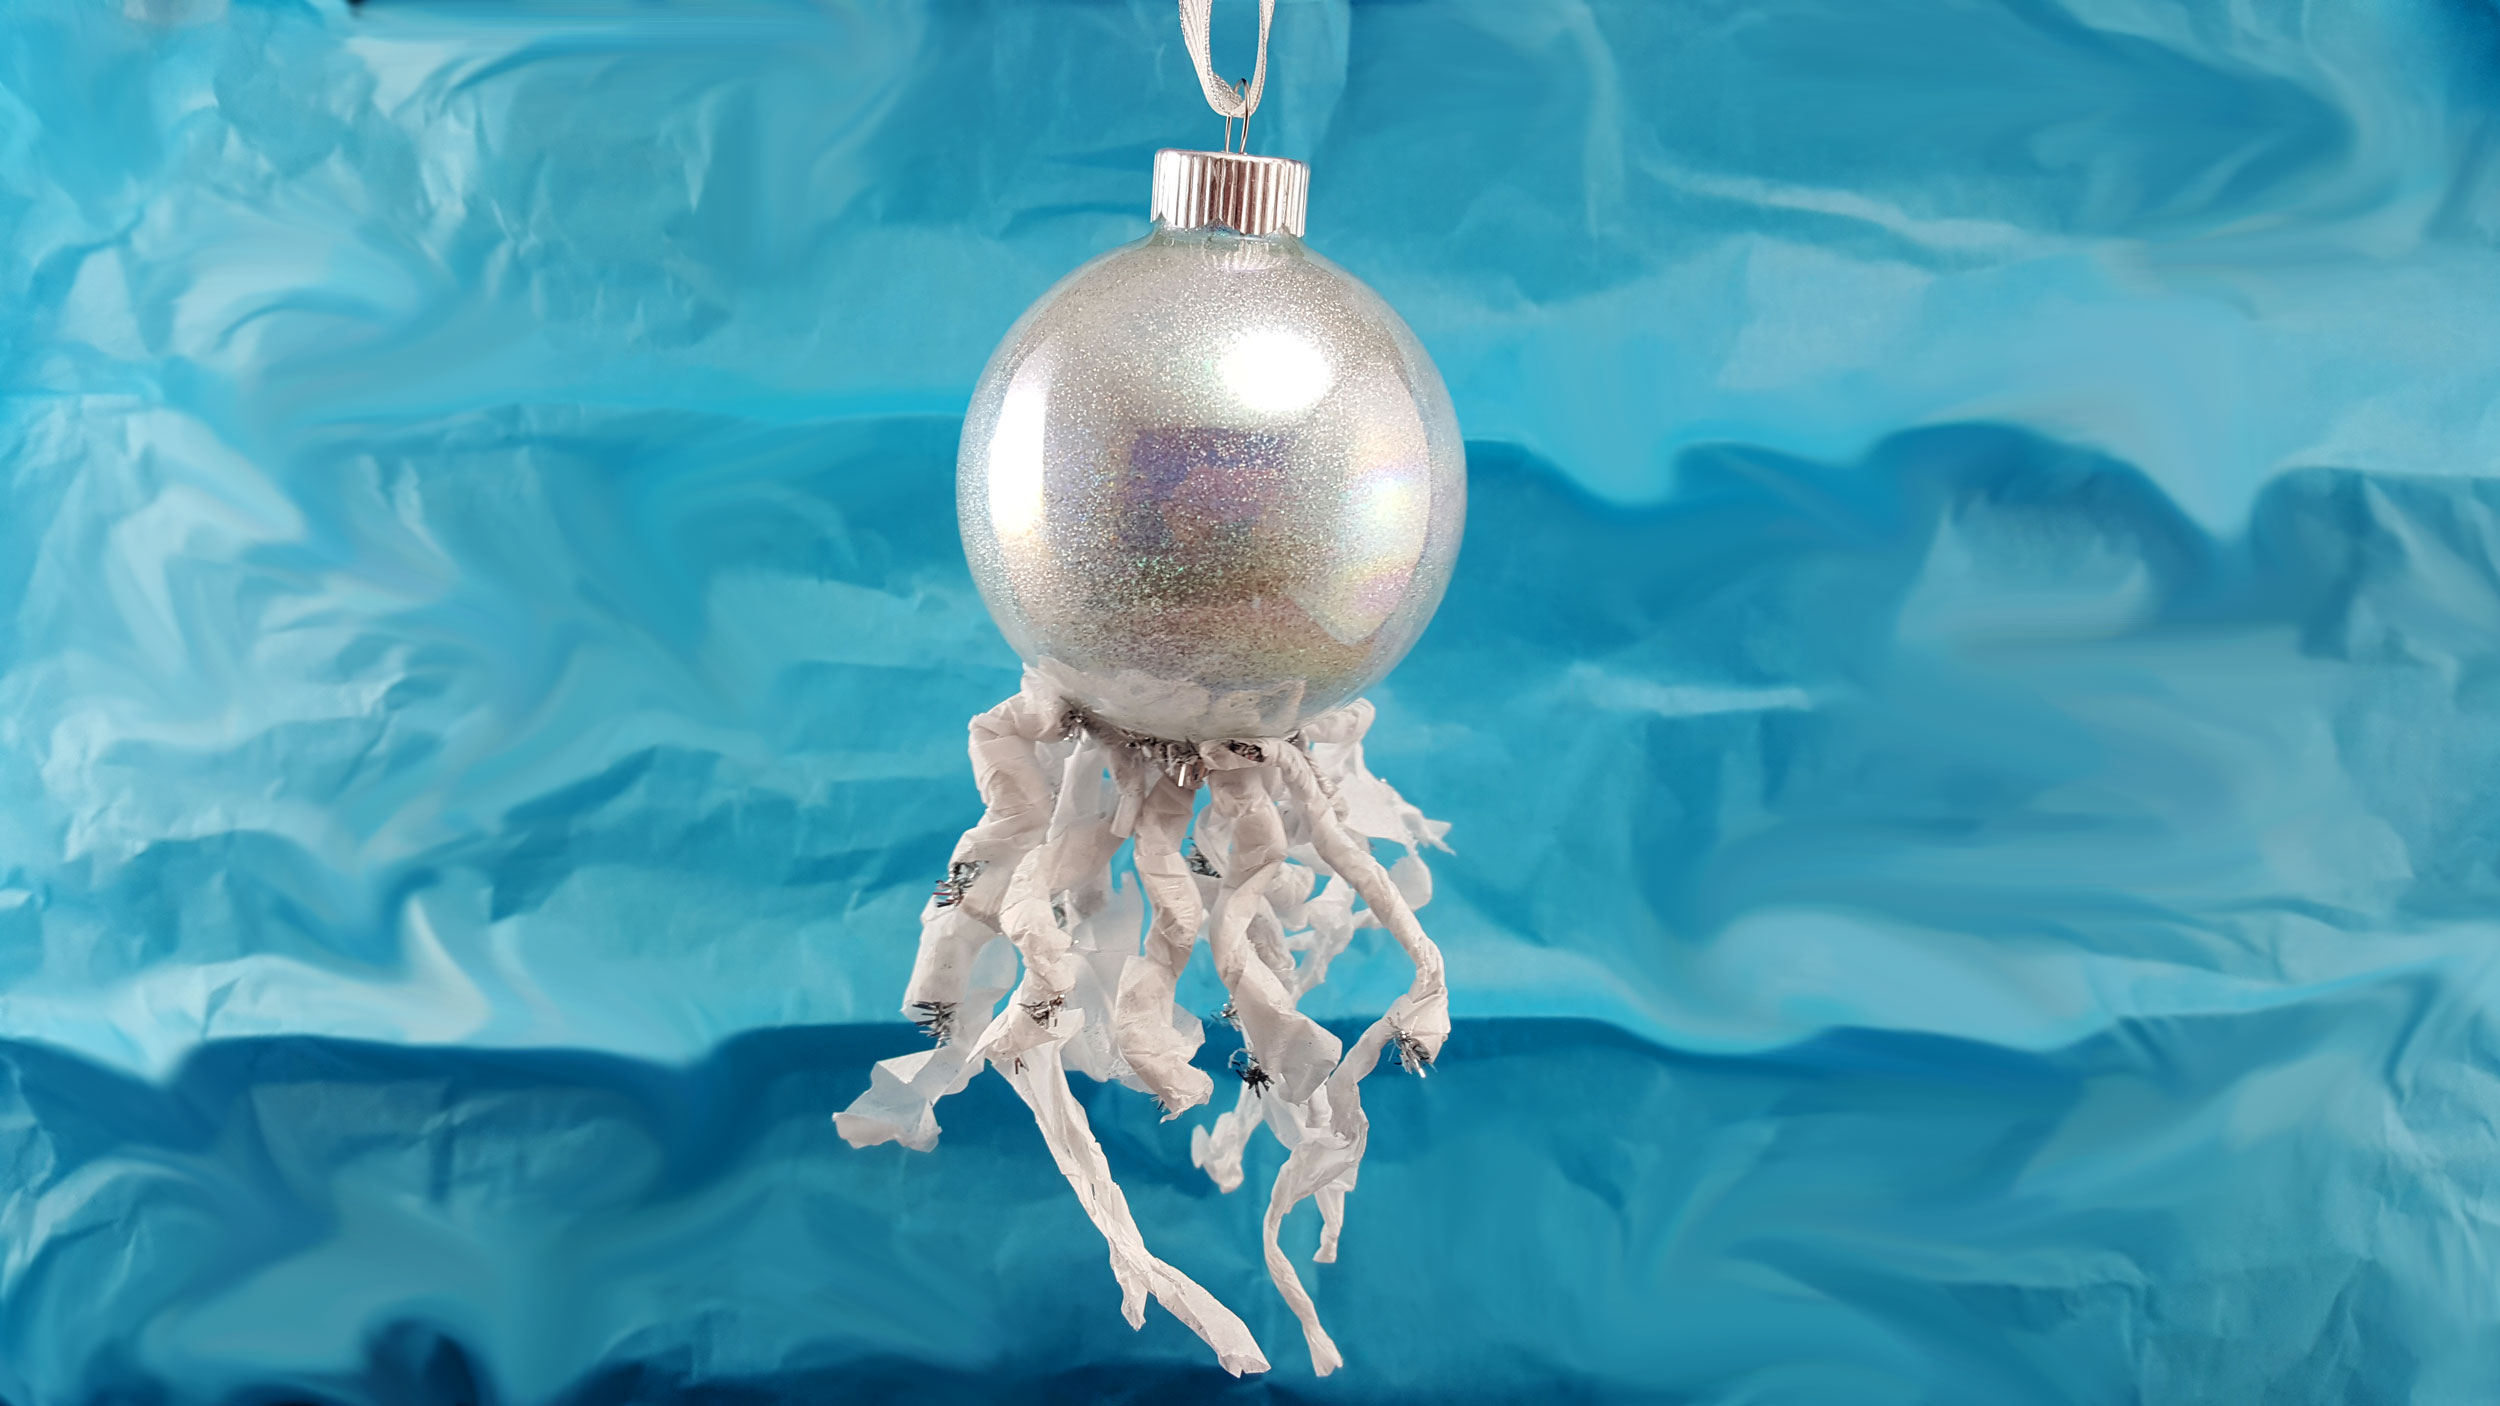 Completed iridescent jellyfish ornament with blue backdrop. | OrnamentShop.com